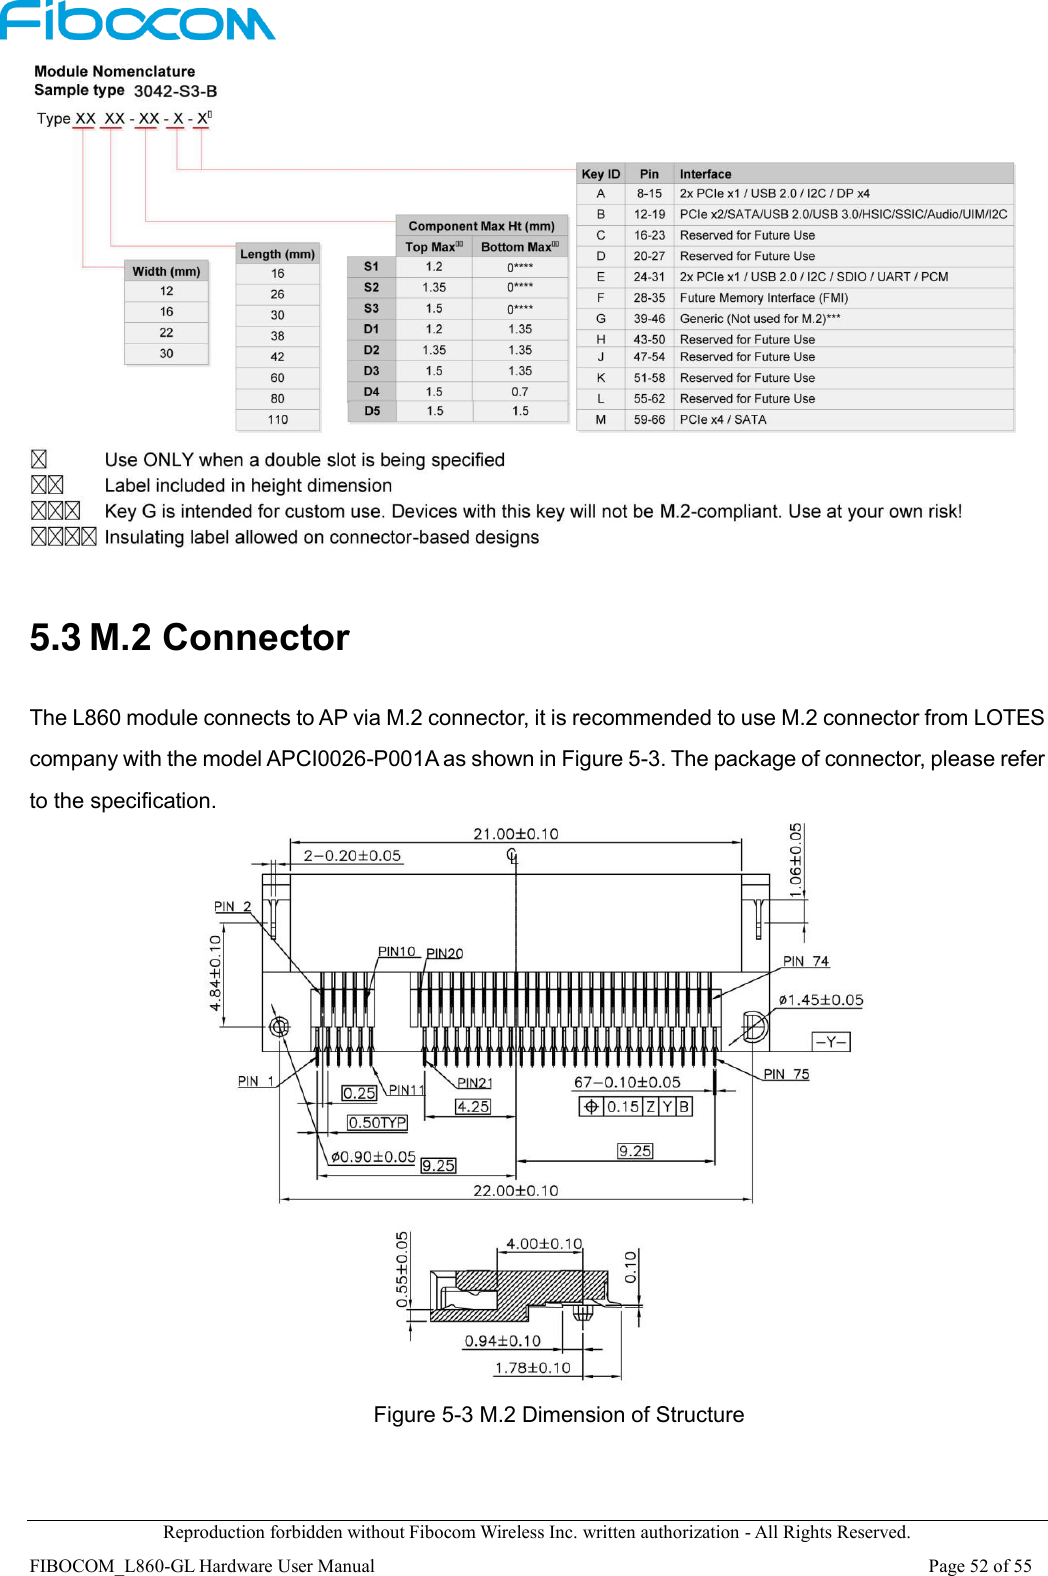  Reproduction forbidden without Fibocom Wireless Inc. written authorization - All Rights Reserved. FIBOCOM_L860-GL Hardware User Manual                                                                                                                      Page 52 of 55   5.3 M.2 Connector The L860 module connects to AP via M.2 connector, it is recommended to use M.2 connector from LOTES company with the model APCI0026-P001A as shown in Figure 5-3. The package of connector, please refer to the specification.   Figure 5-3 M.2 Dimension of Structure 